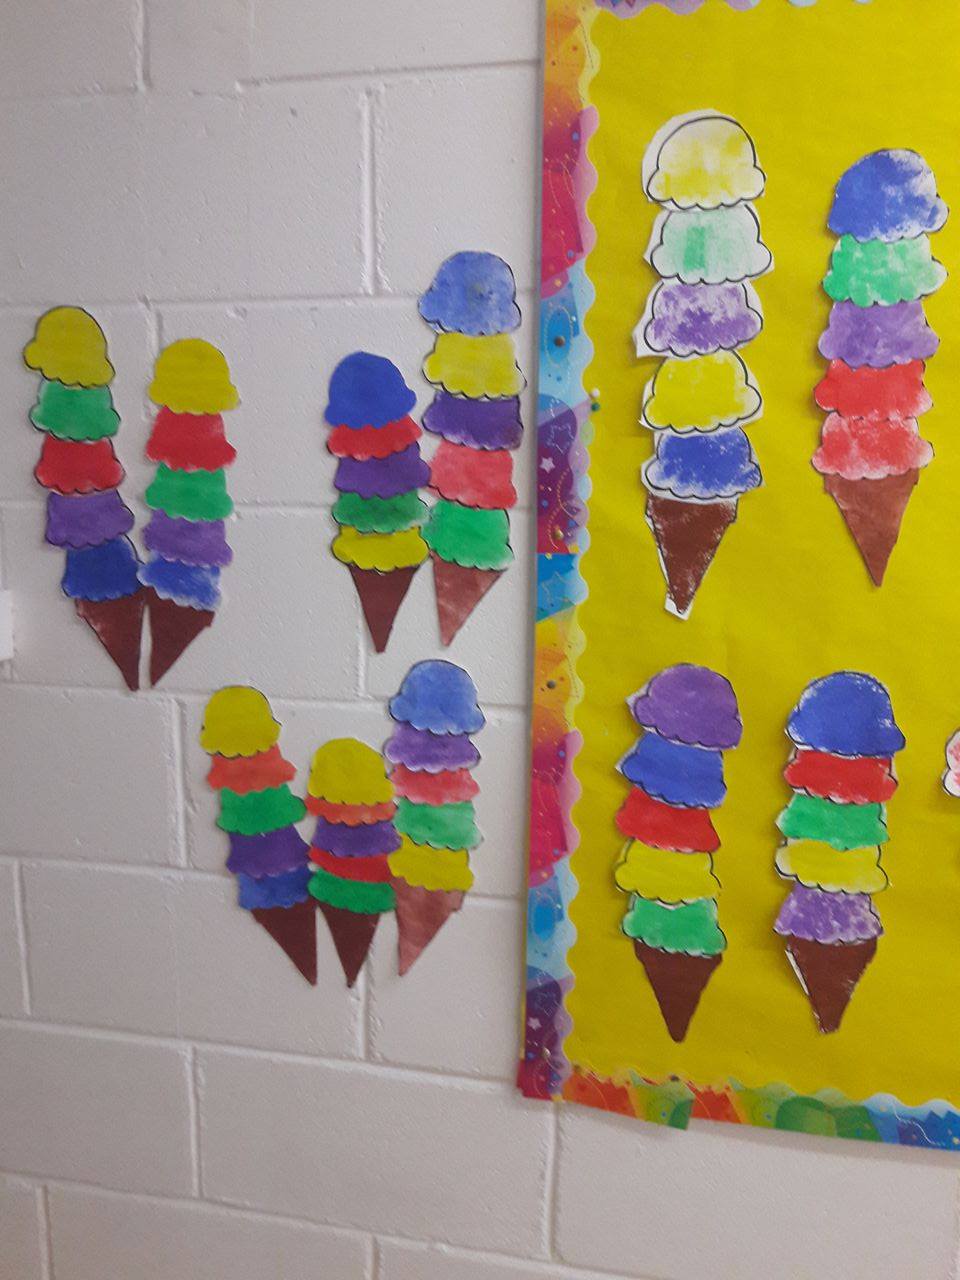 Ms. Coleman's Senior Infants and First Class: Ice cream art